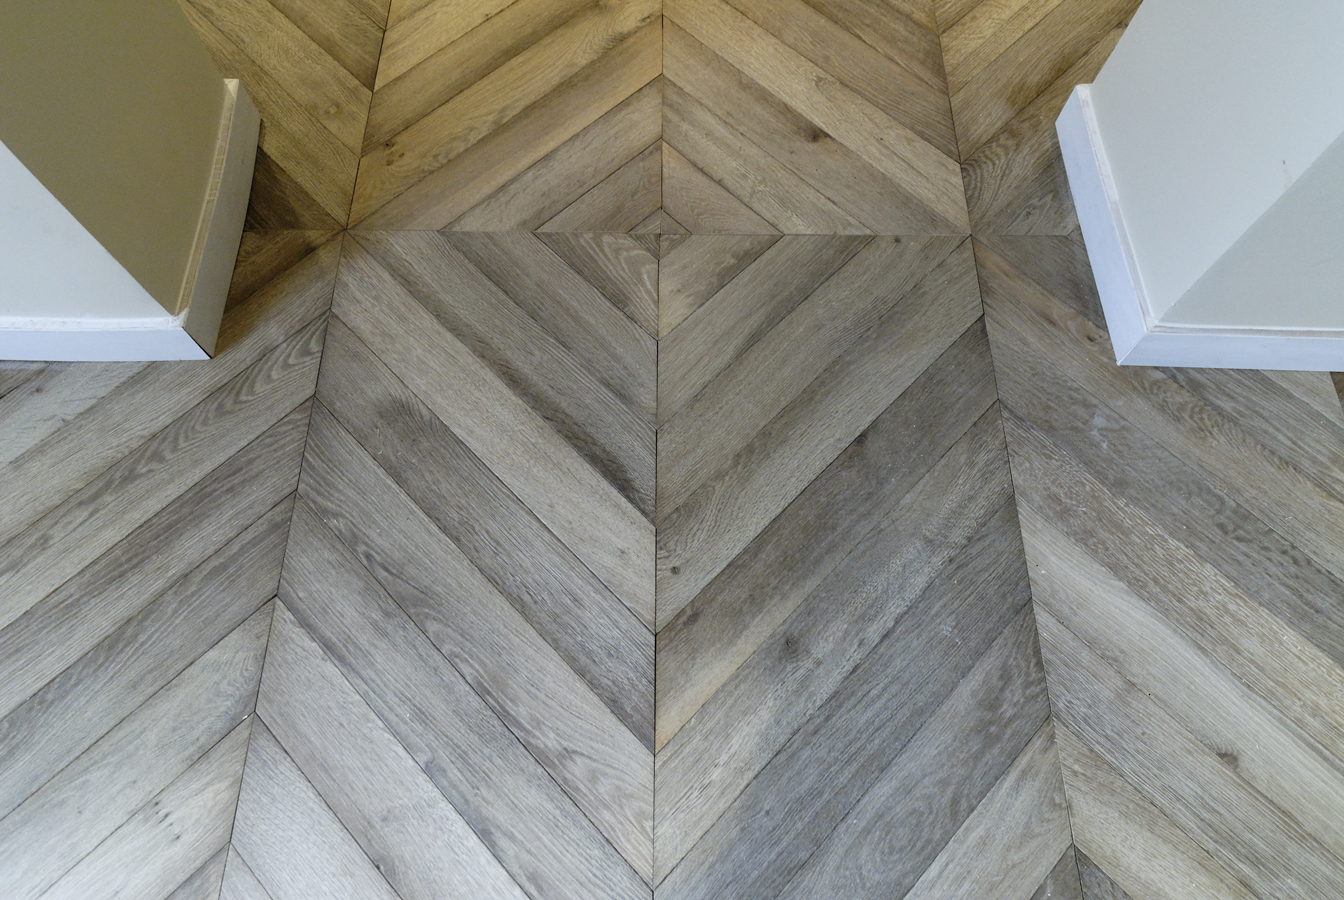 Details of the parquet floor chevron in the entry